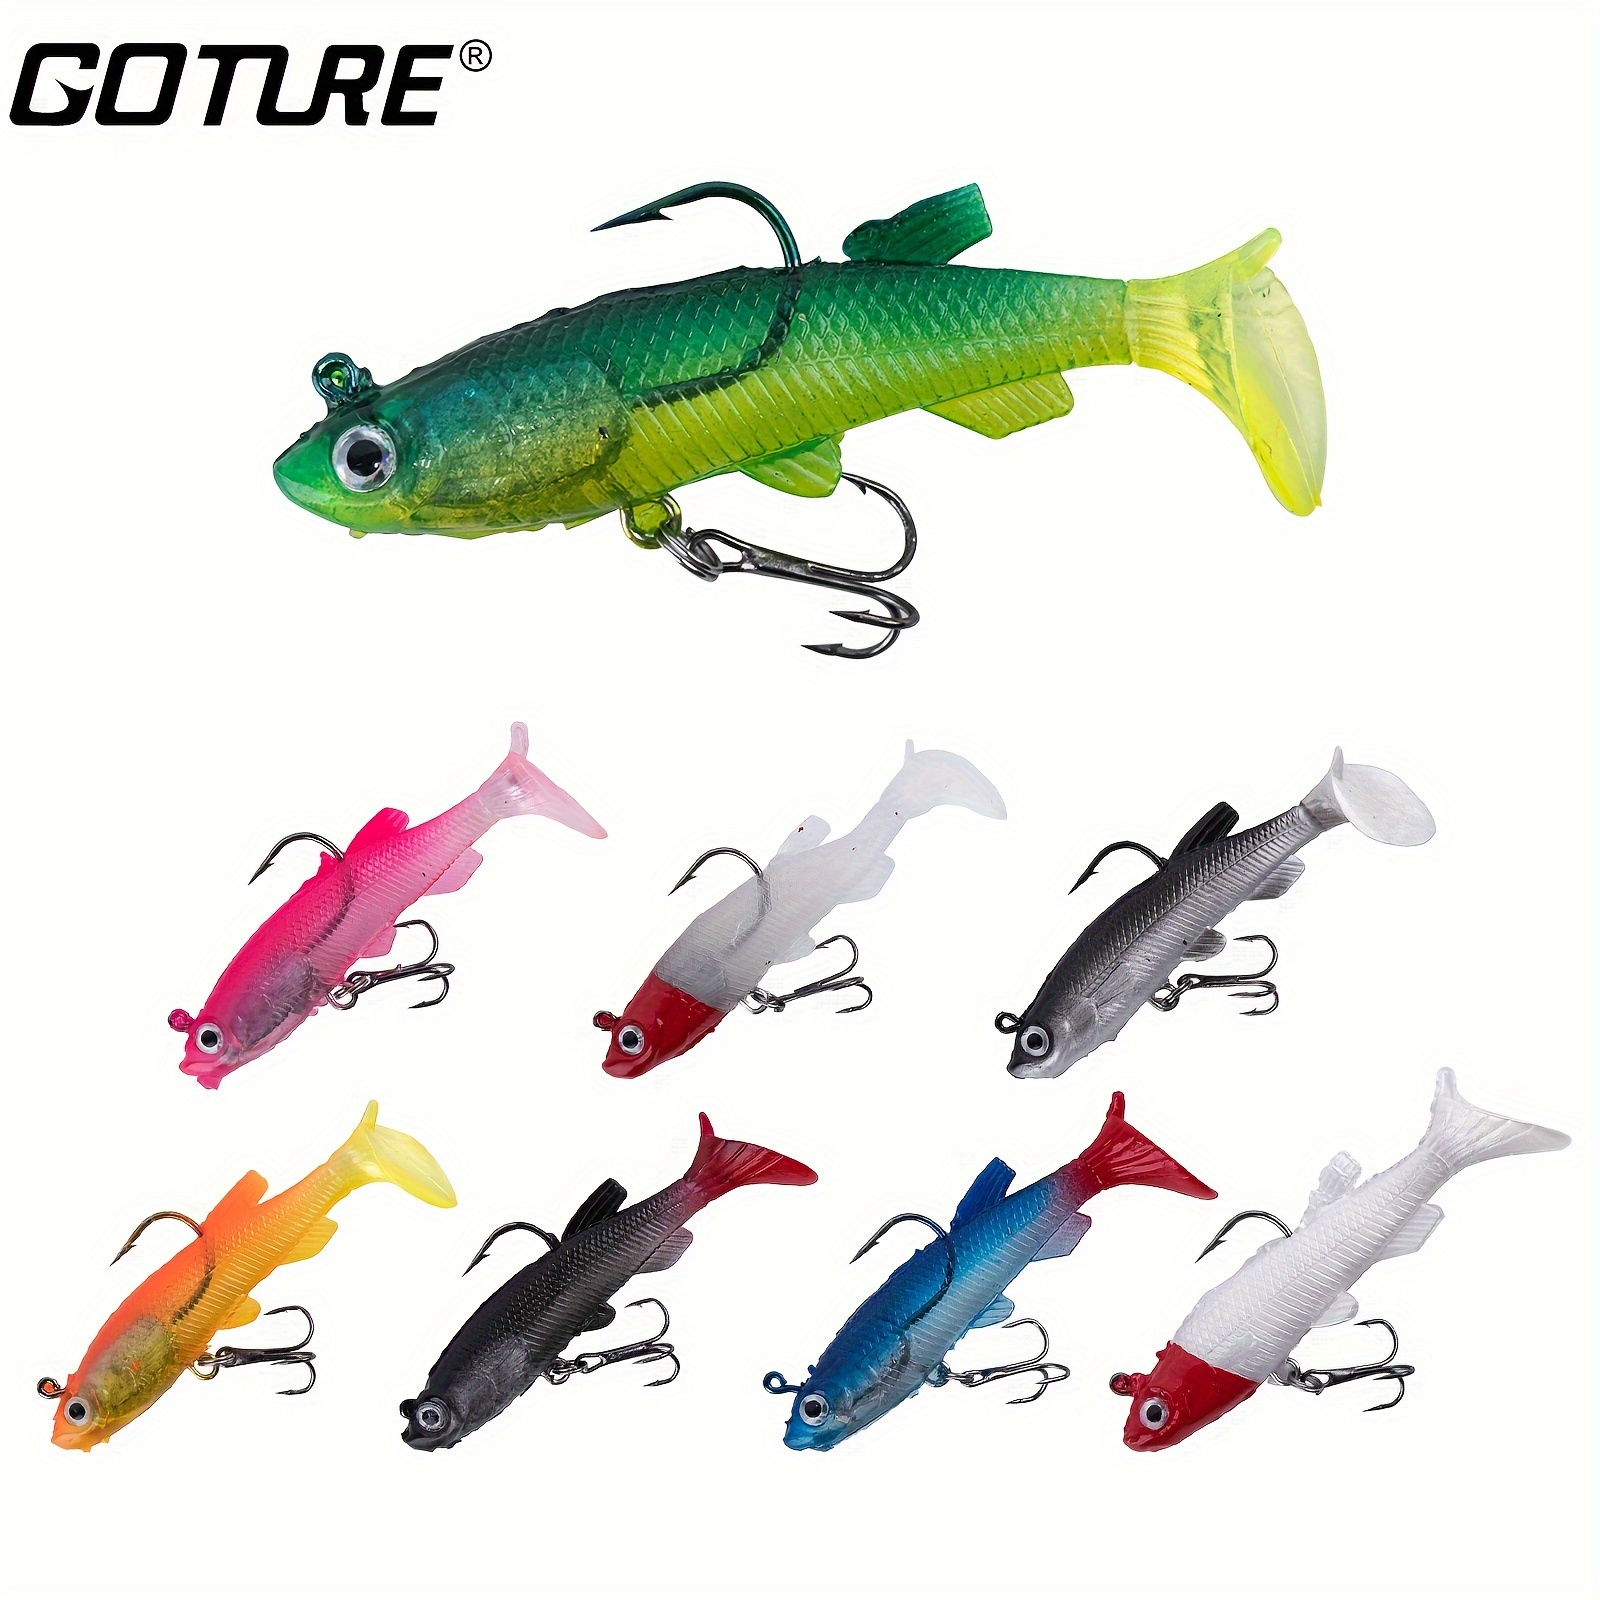 1pc Soft Fishing Lure, Jig Head Paddle Tail Swimbait For Bass Trout Walleye  Crappie, Fishing Gear And Equipment For Saltwater Freshwater